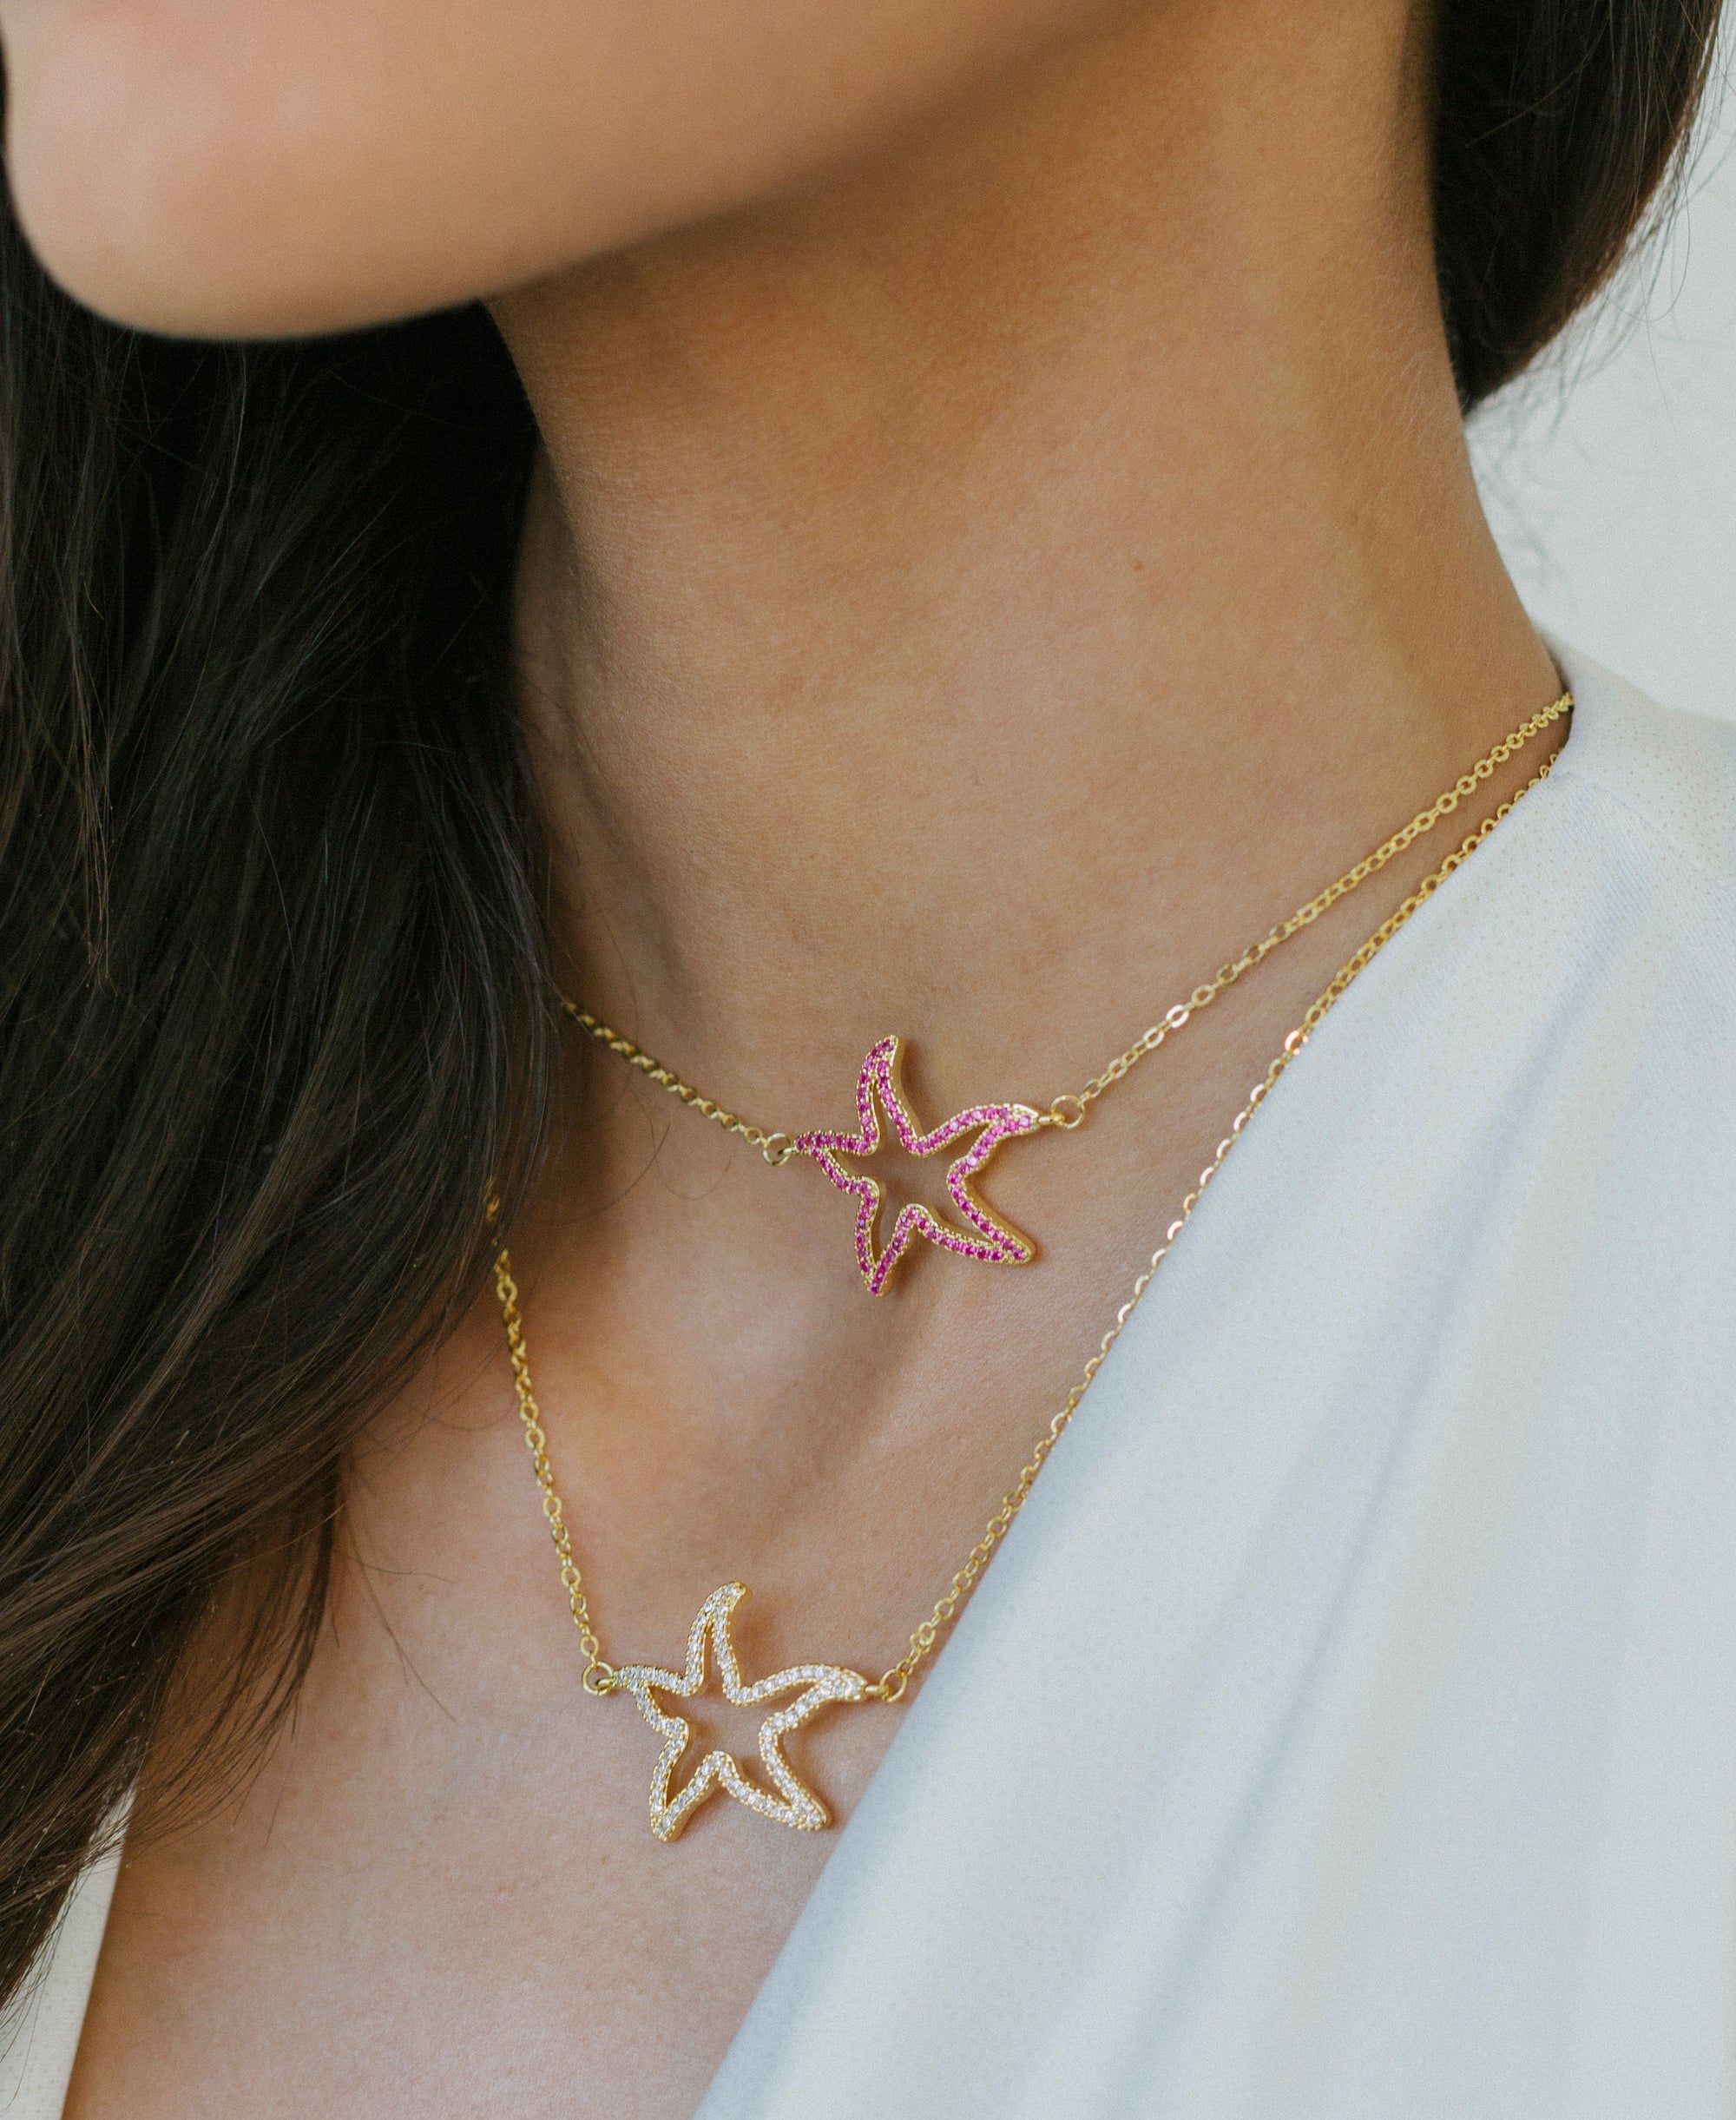 SEA STAR BLING NECKLACE